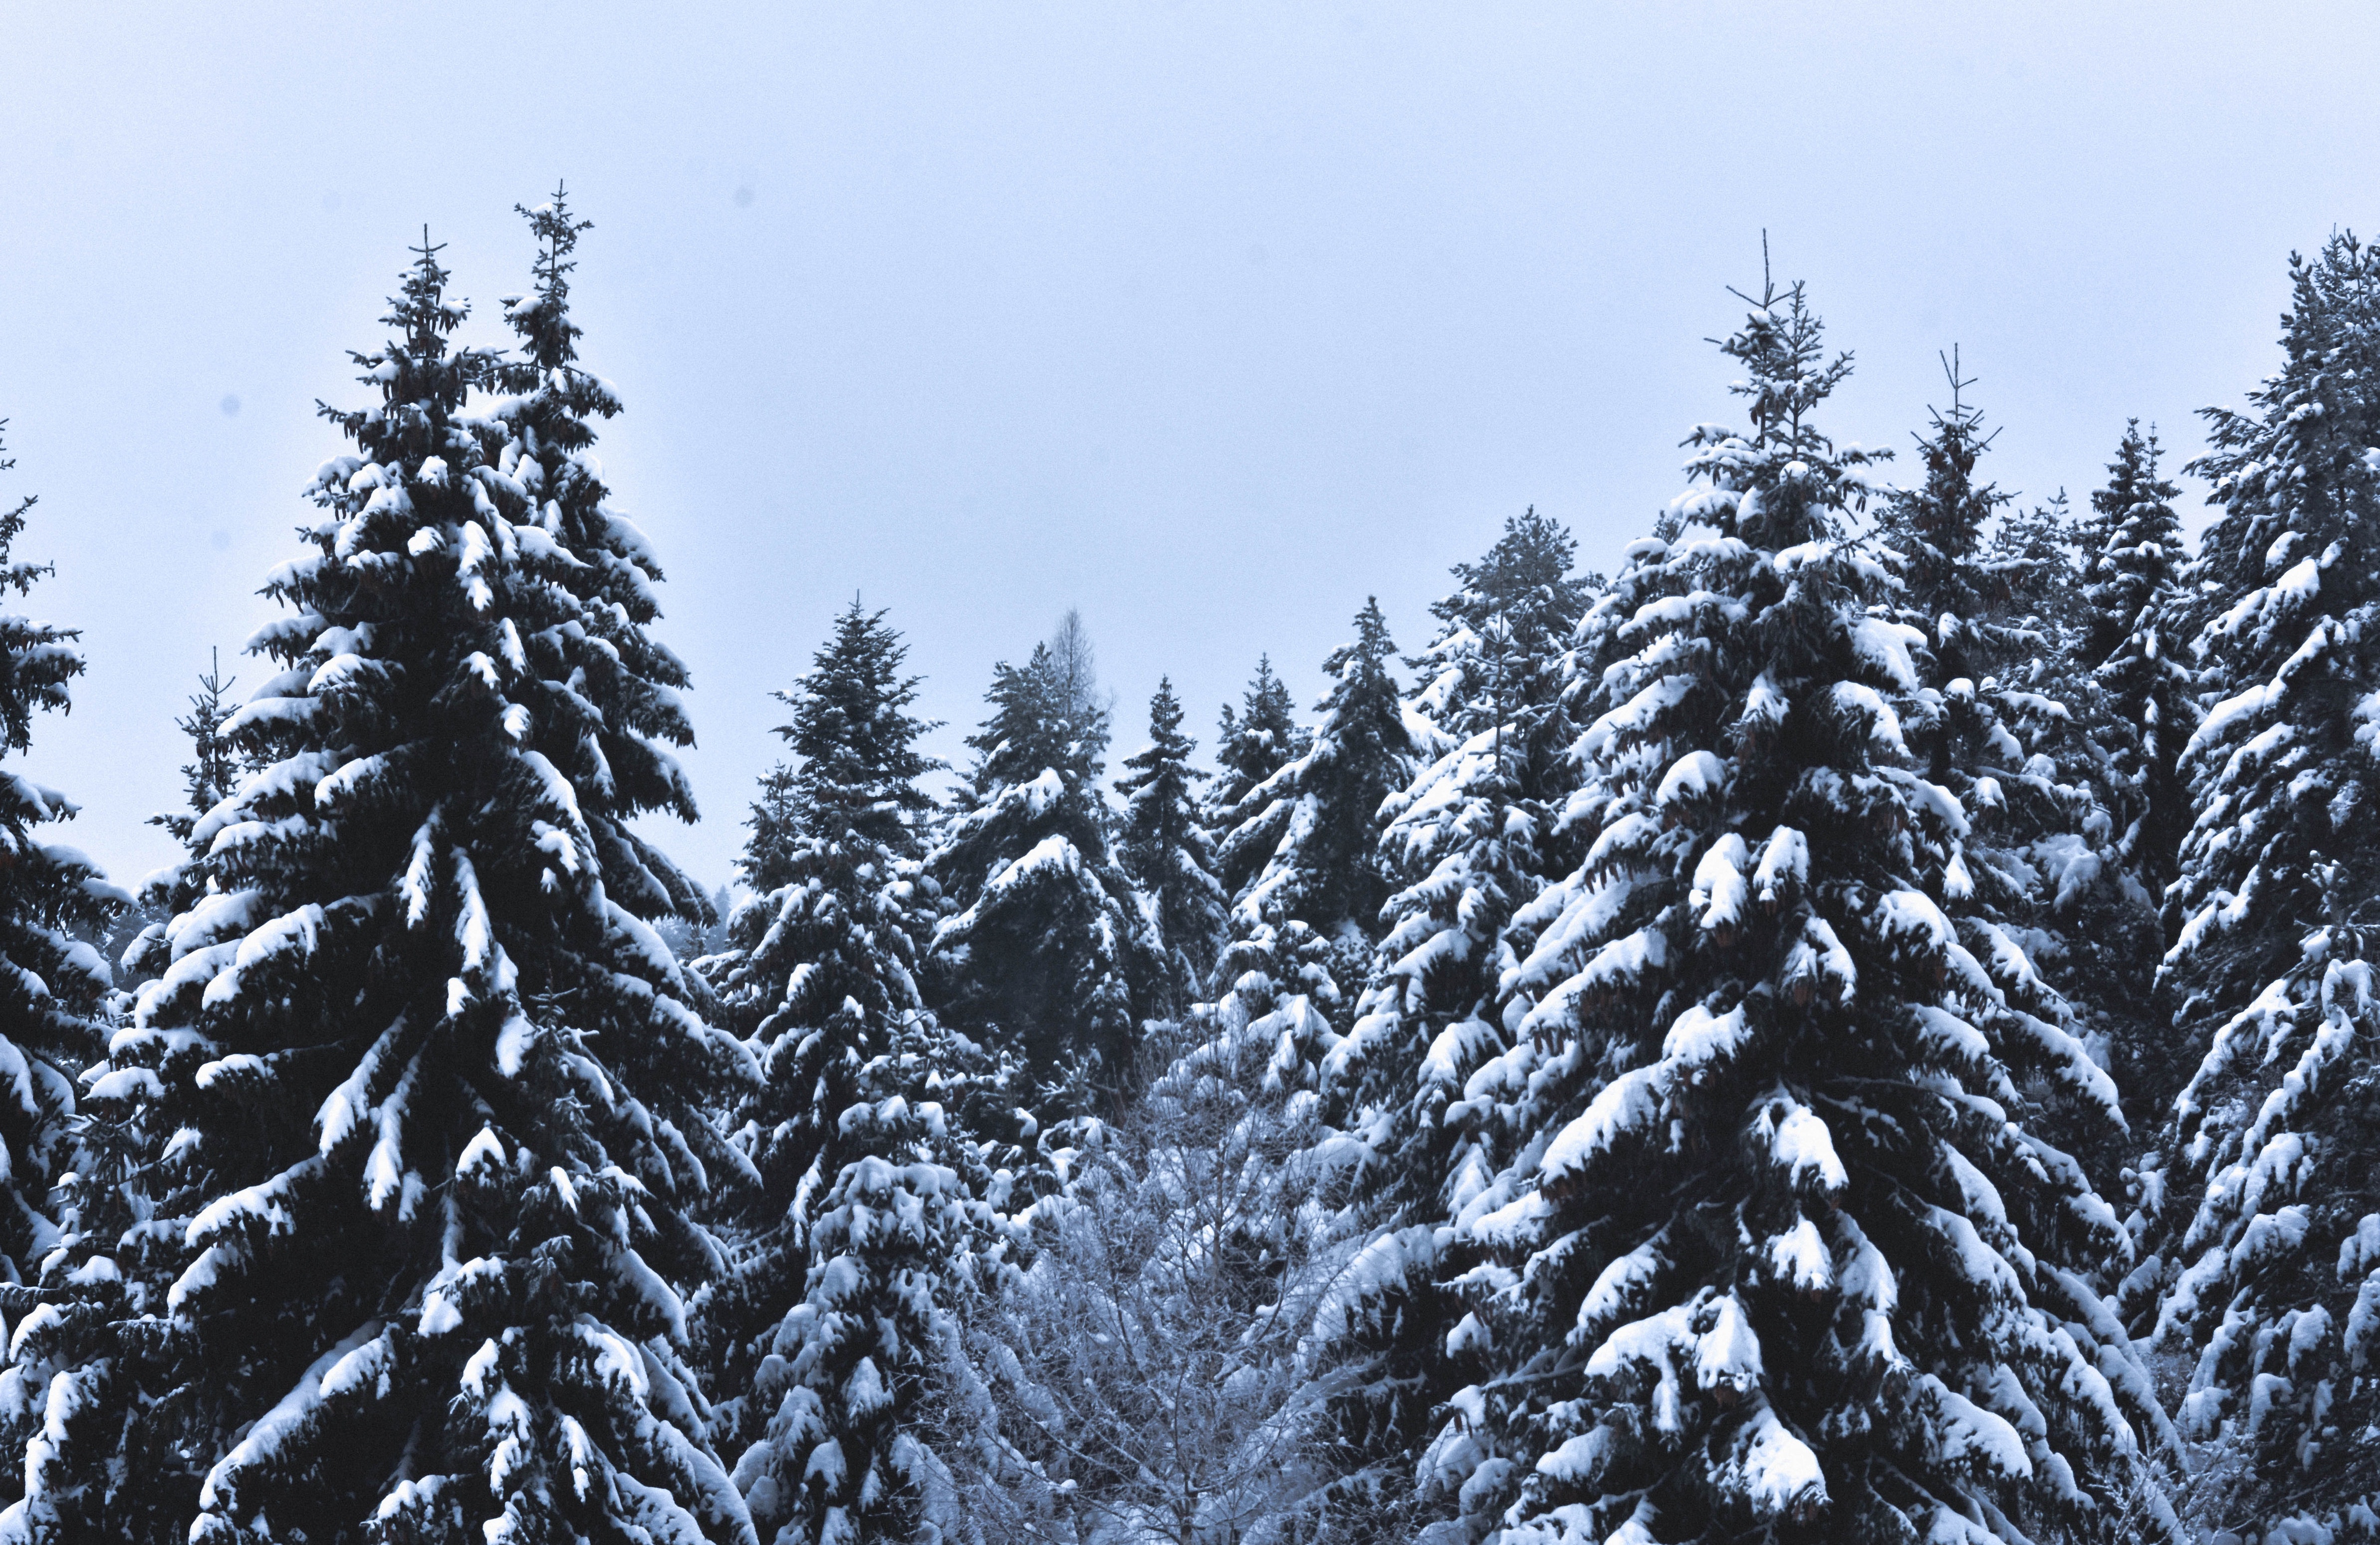 Snow Covered Pine Trees Under Cloudy Sky, Branches, Outdoors, Winter landscape, Winter, HQ Photo